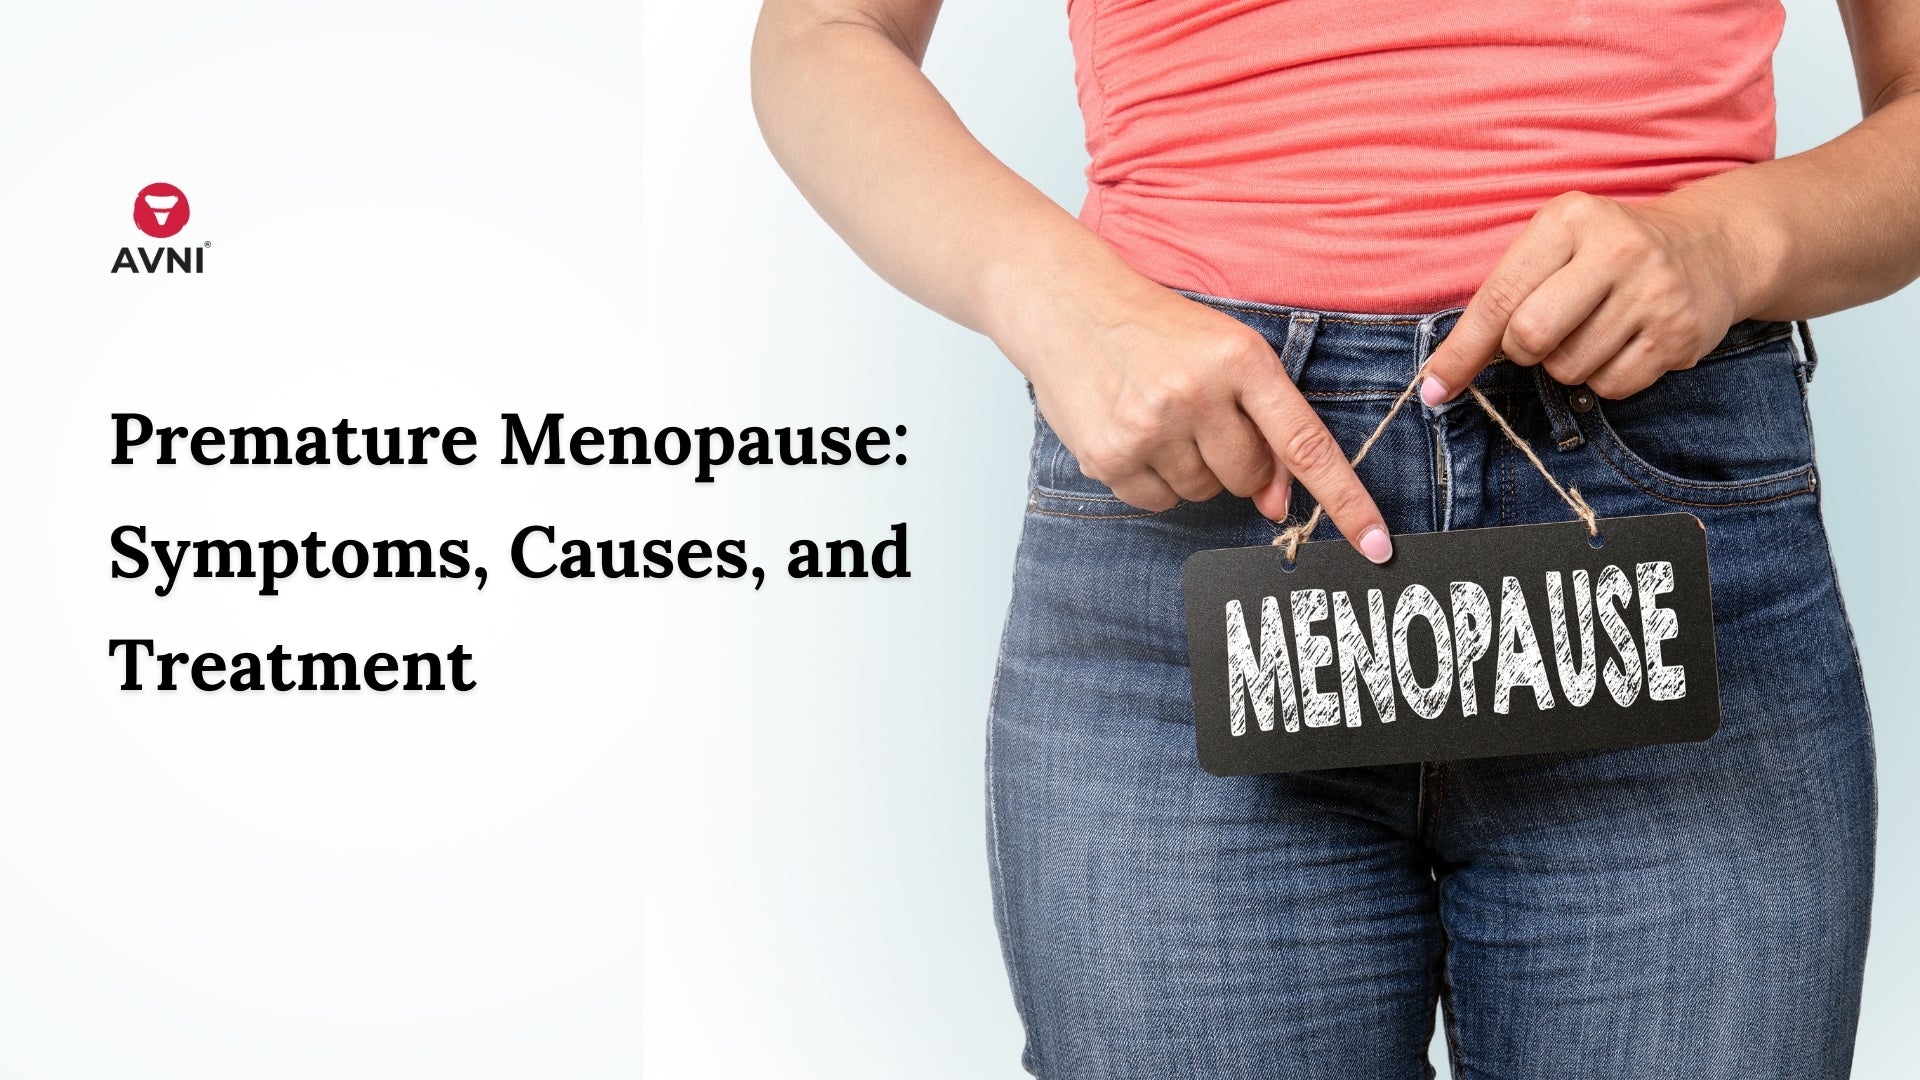 What to Know About Perimenopause: Signs, Symptoms, Treatments